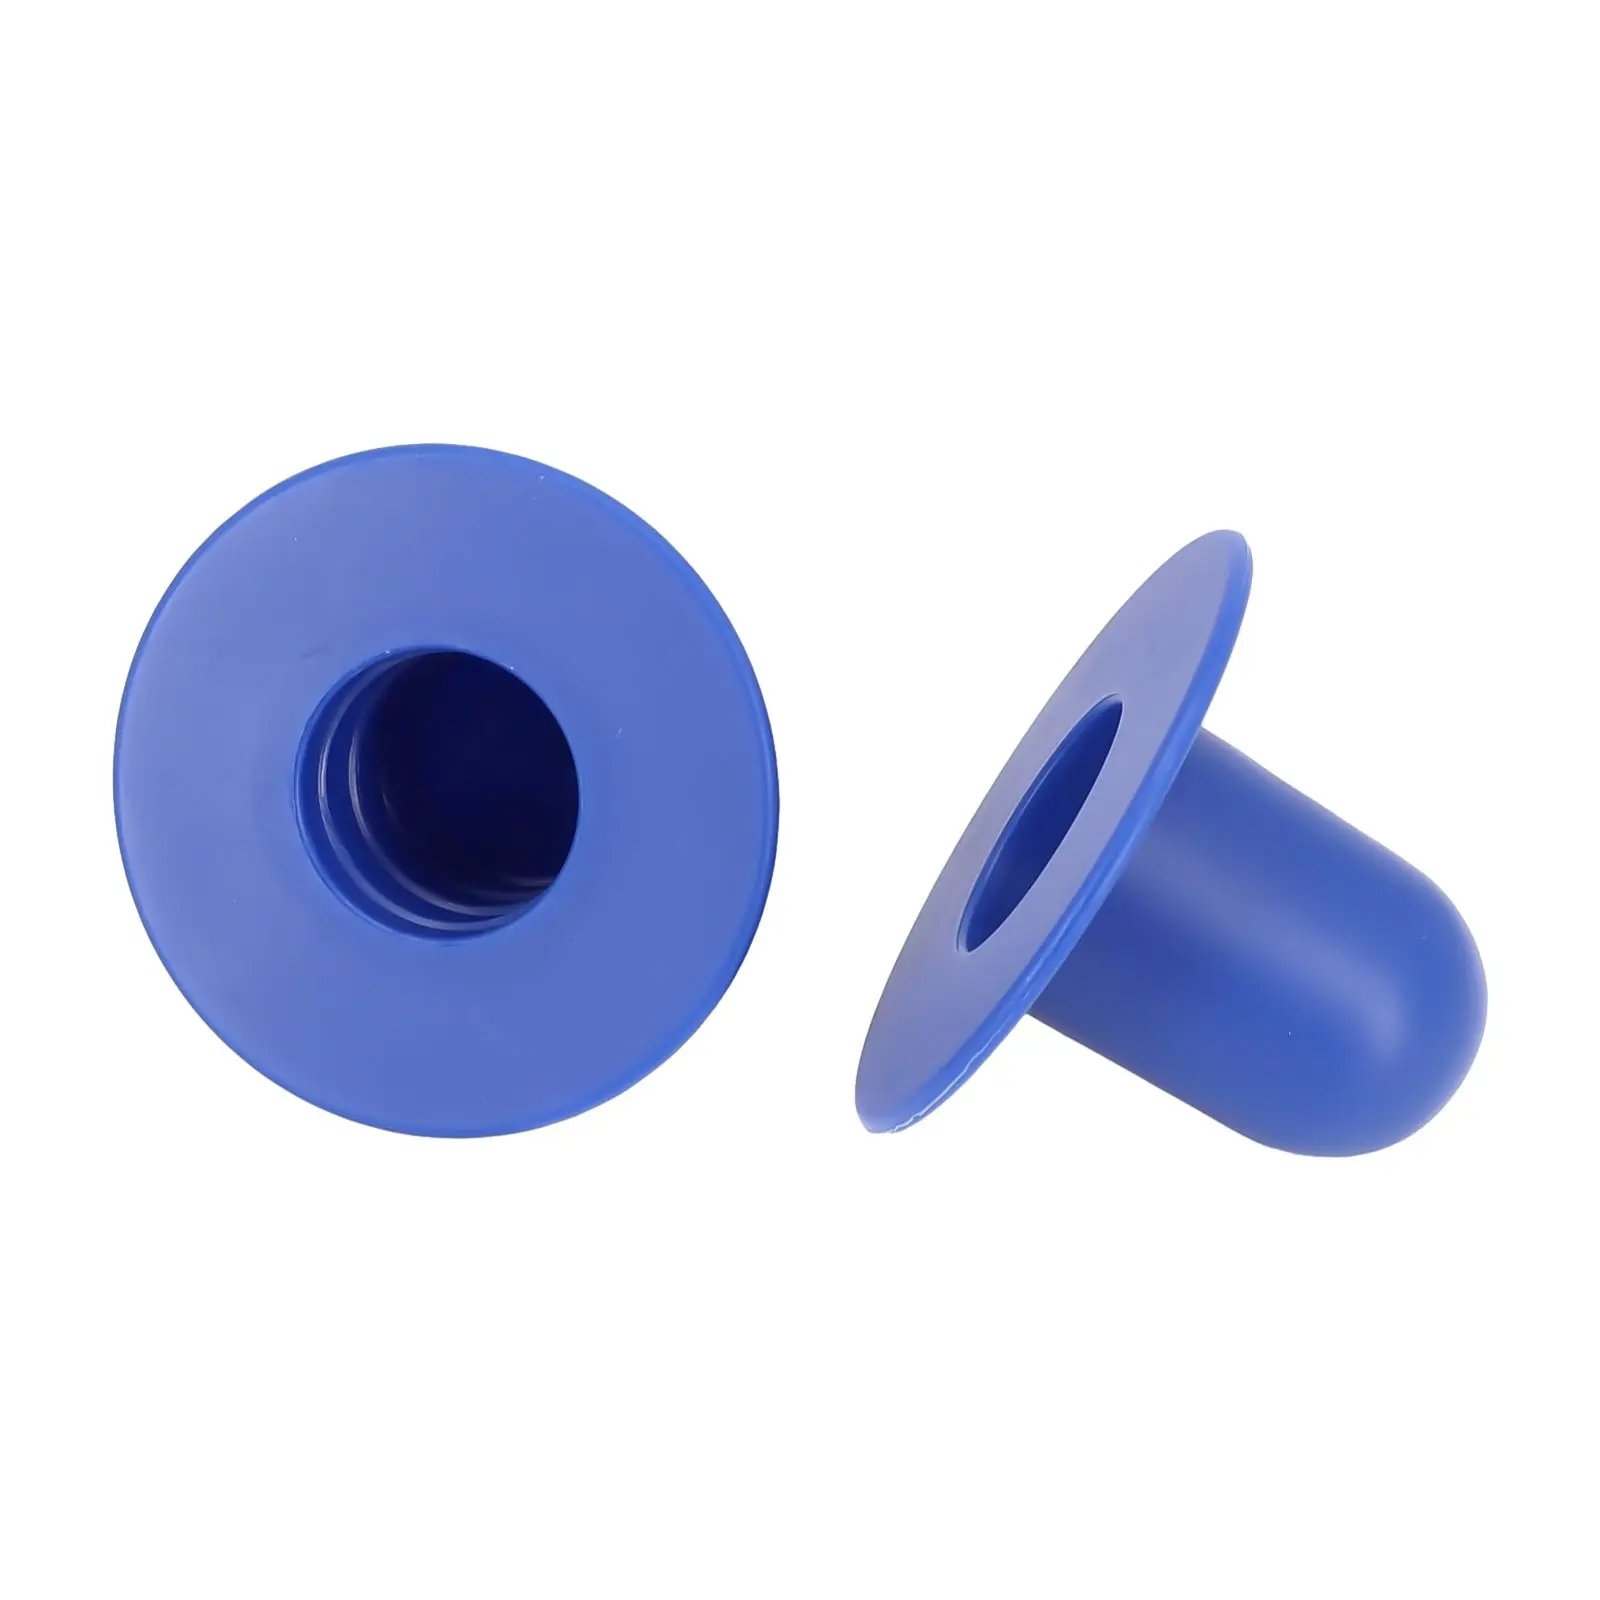 

Replacement Swimming Pool Plugs 2pcs Blue Filter Pump Parts Plastic Pool Accessories Set Stopper Strainer Hole